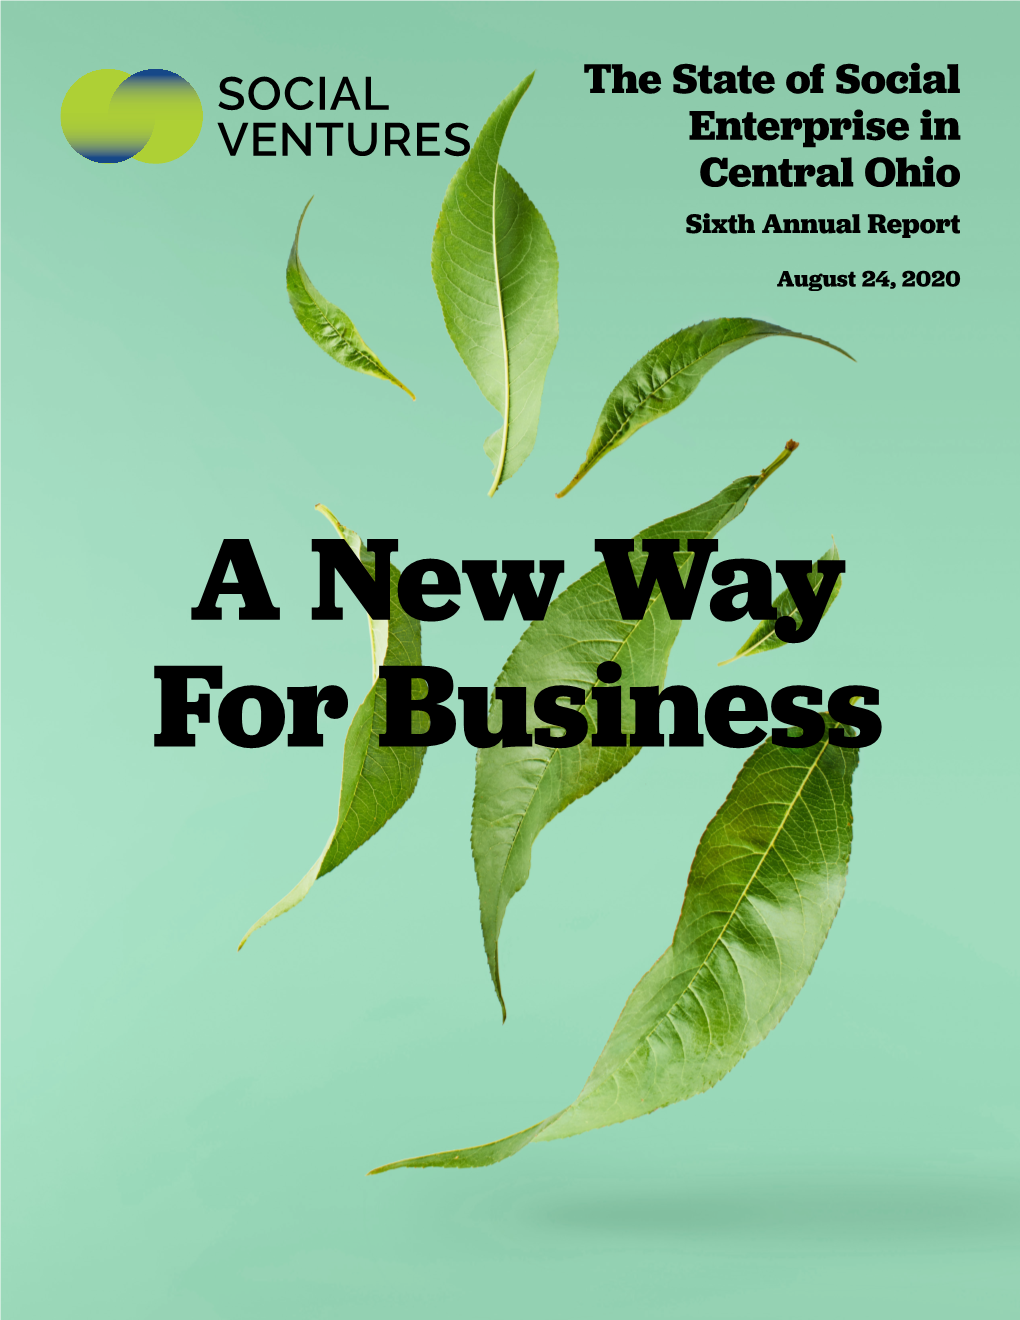 The State of Social Enterprise in Central Ohio Sixth Annual Report